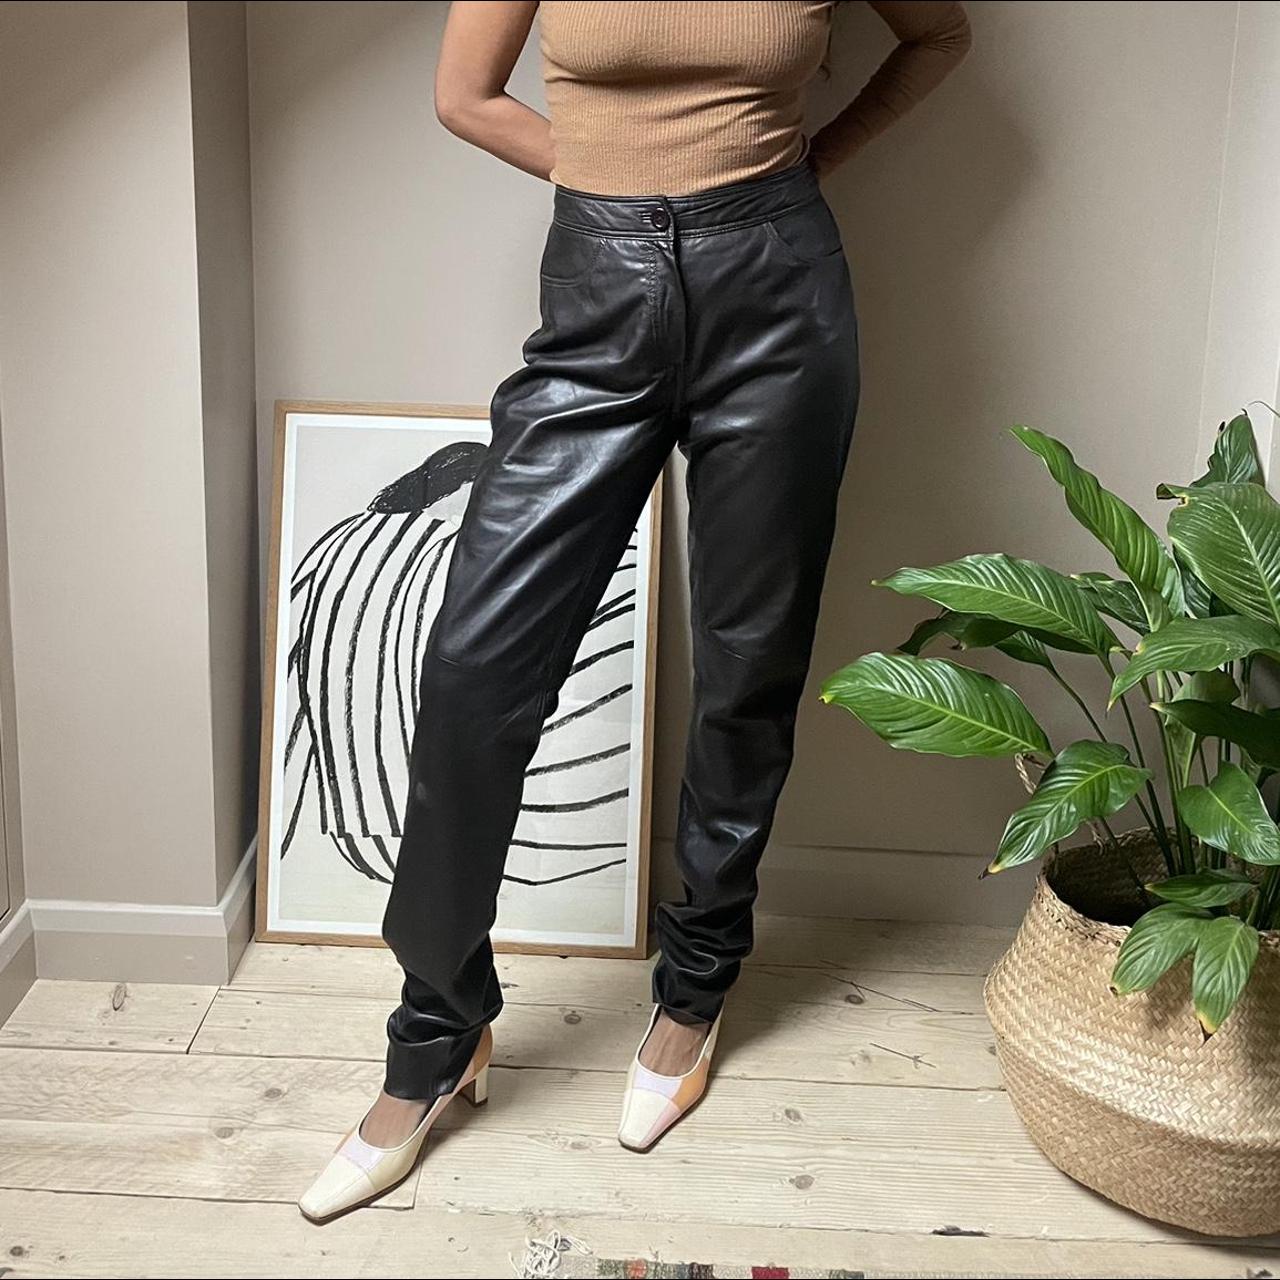 Buy Stretchy Cotton Harem Pants .oversize Black Hippie Pants Baggy Trousers,comfortable  Low Crotch Pants Plus Size Loose Pants Japanese. Online in India - Etsy